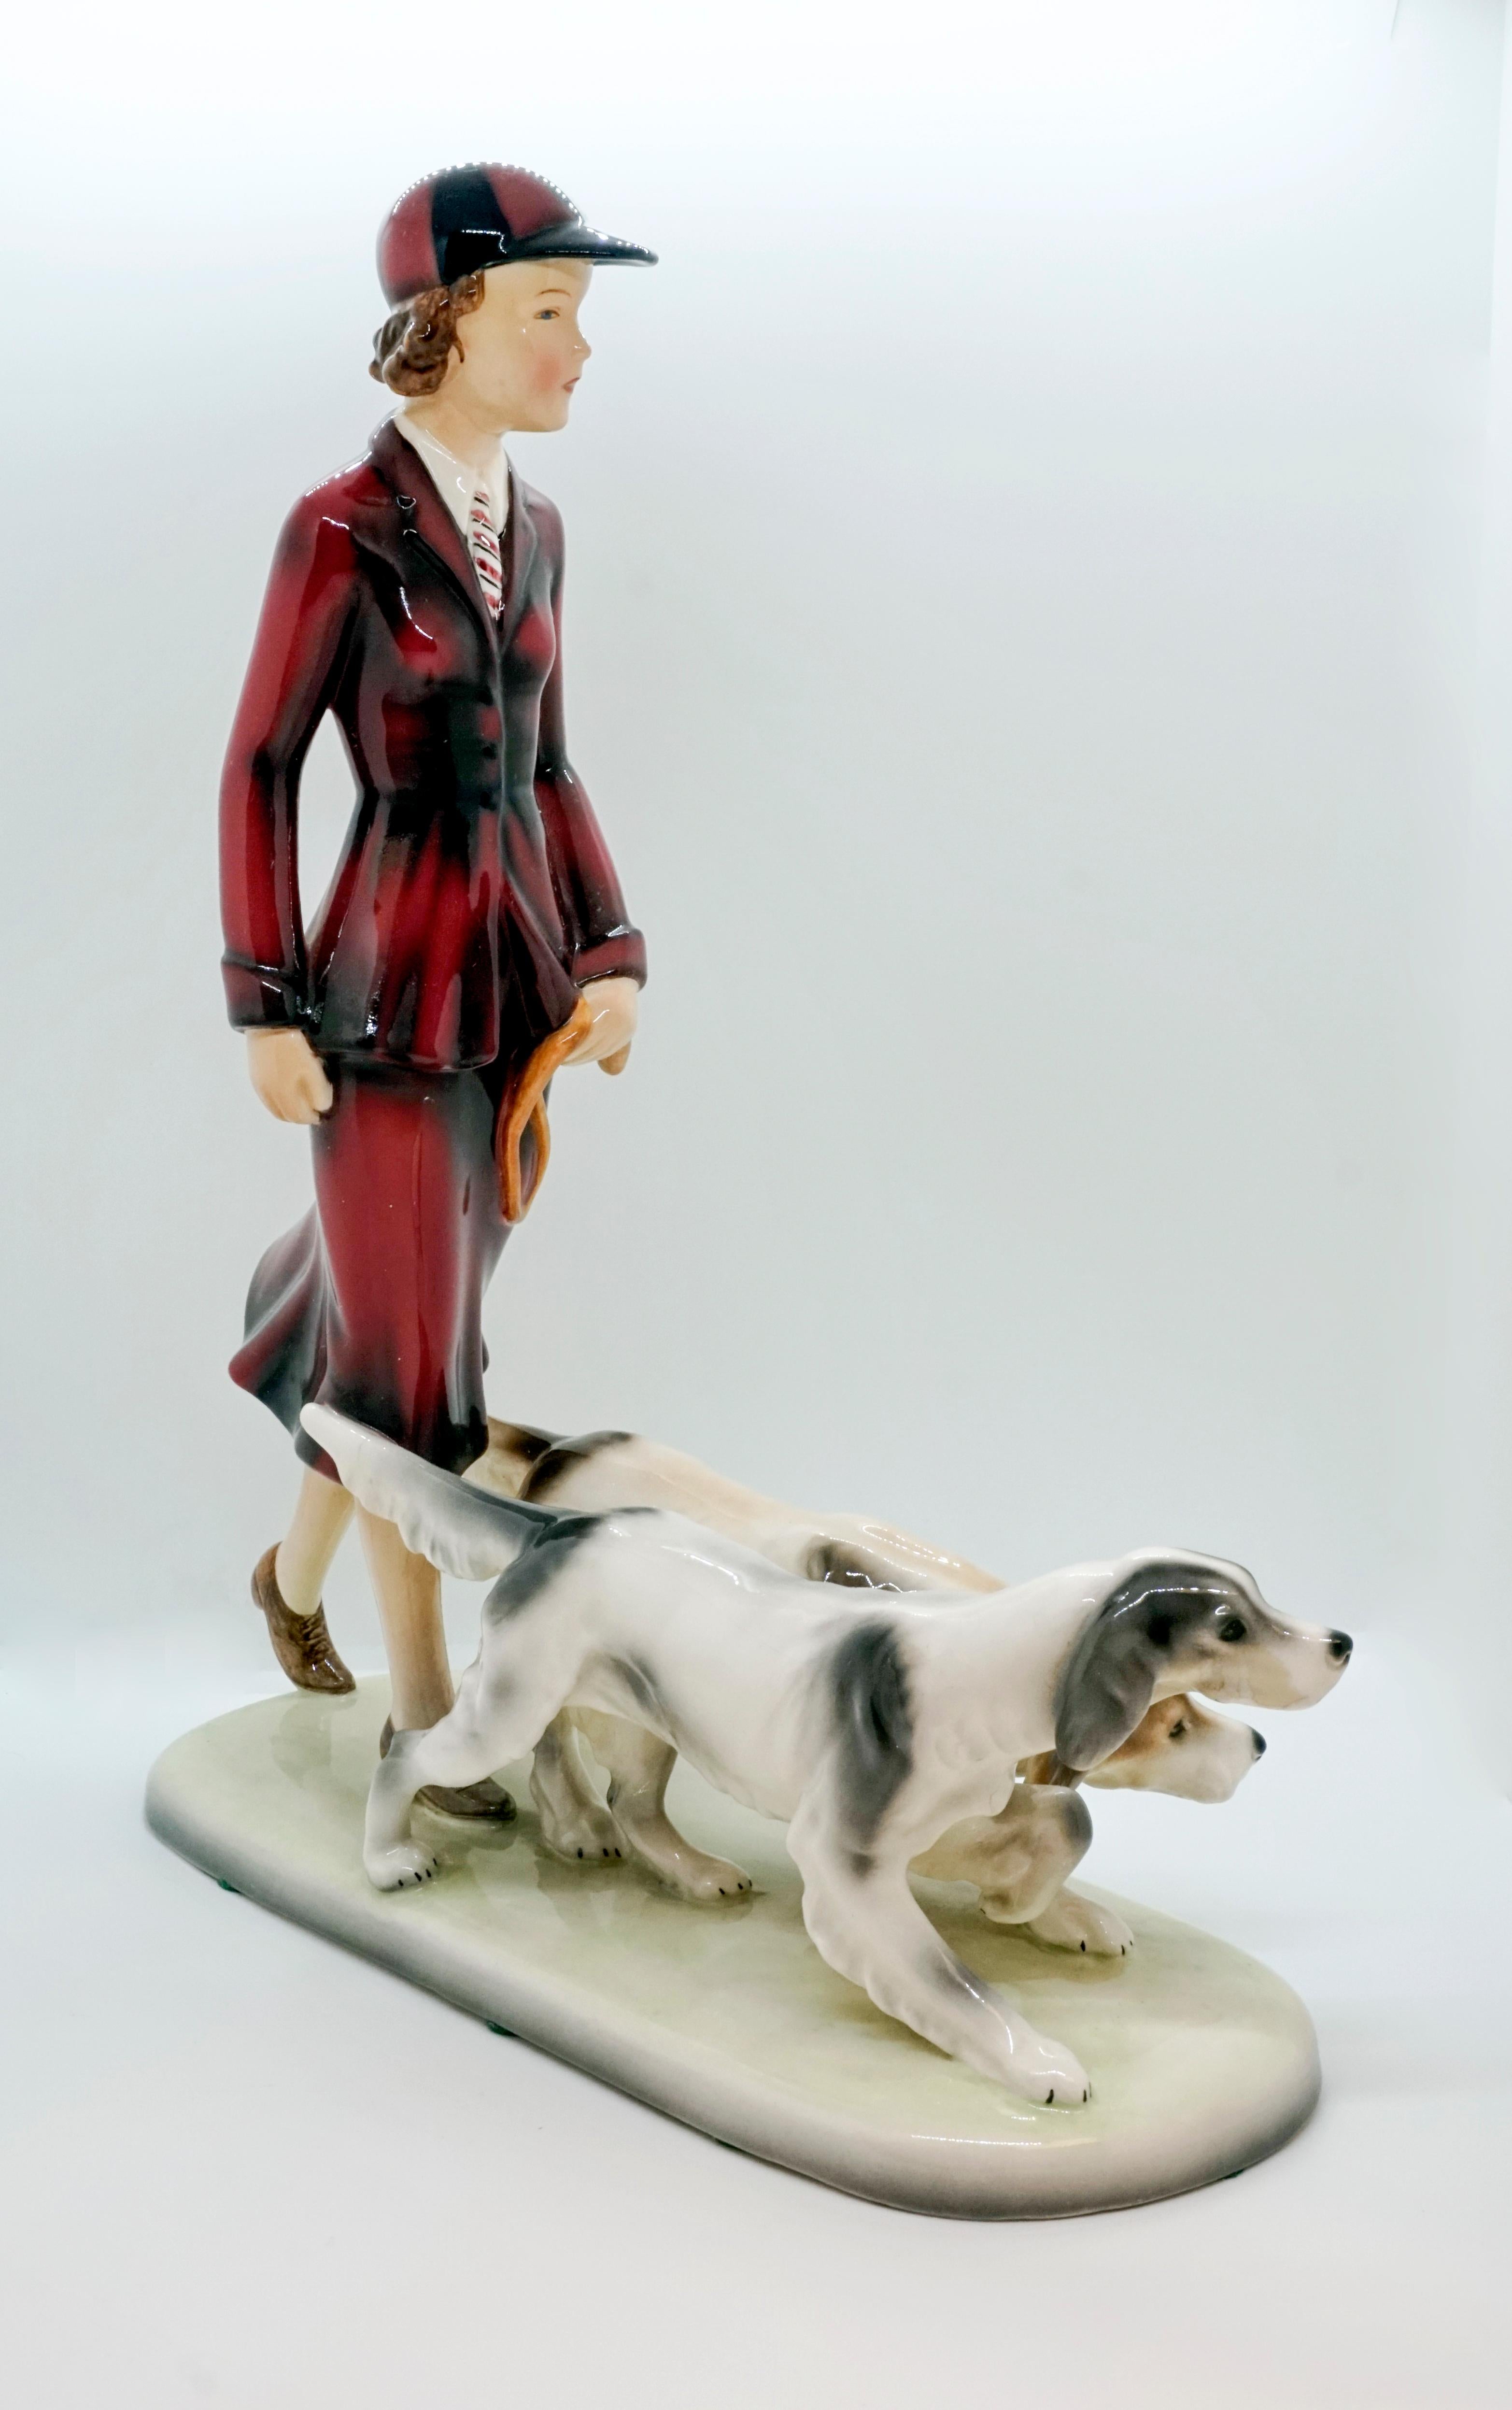 Rare Goldscheider figurine of the 1930s

Young lady with dark blond curly hair and a cap in a sporty costume with skirt and tie running two English pointer hounds.
On a cream-colored rounded rectangular base.

Designed by Stefan Dakon